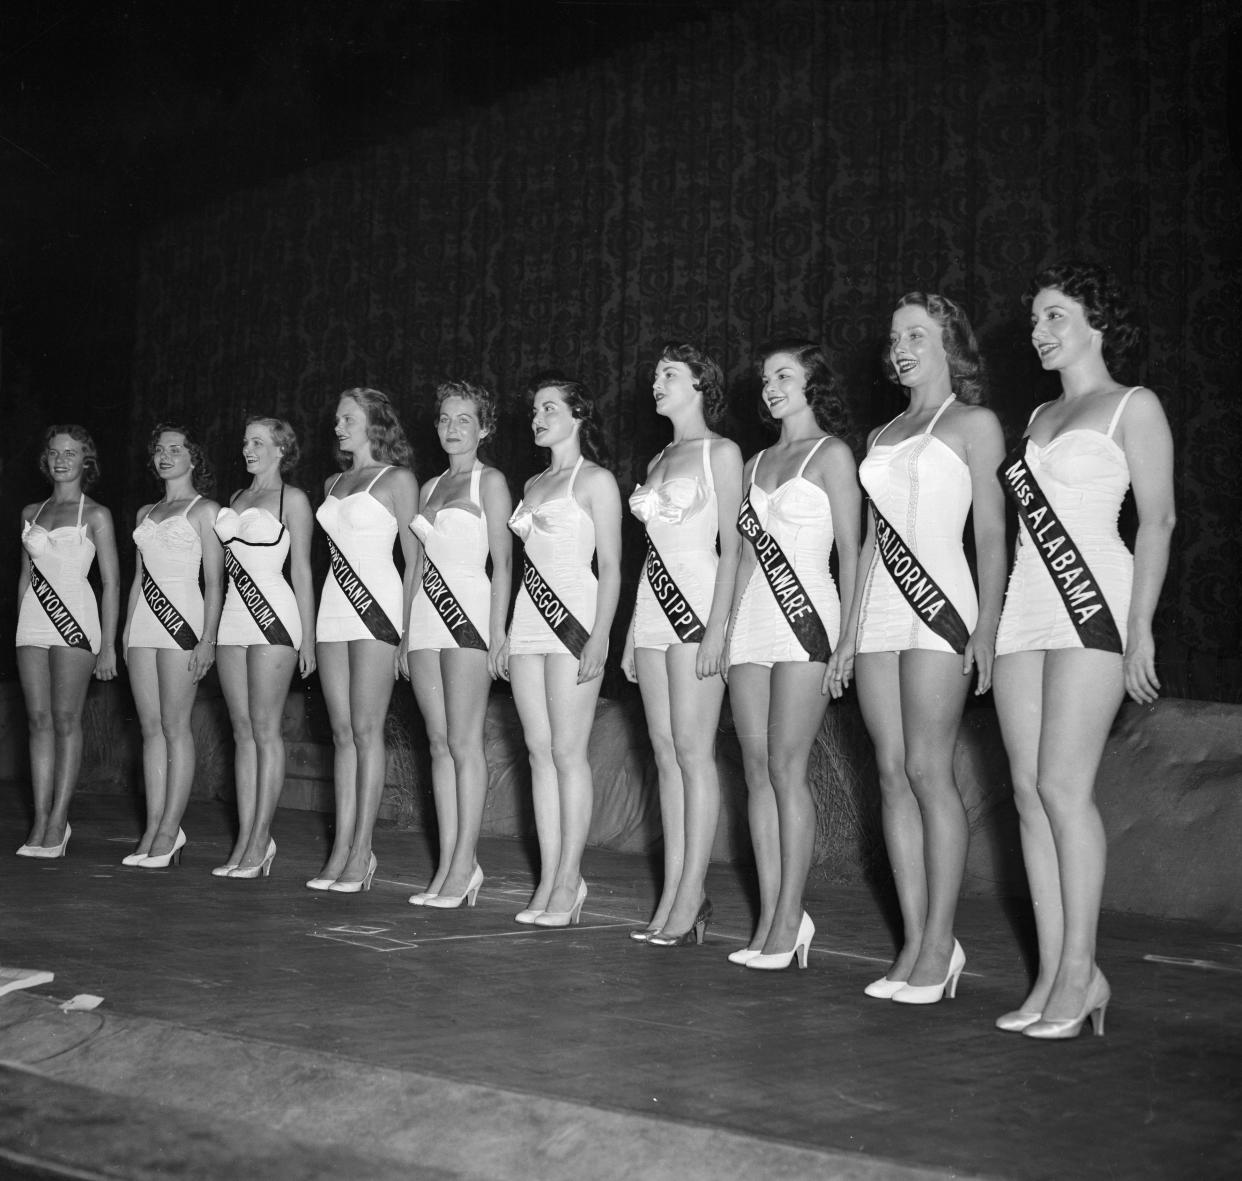 (Original Caption) Evelyn Margaret Ay , who is Miss Pennsylvania, was named 